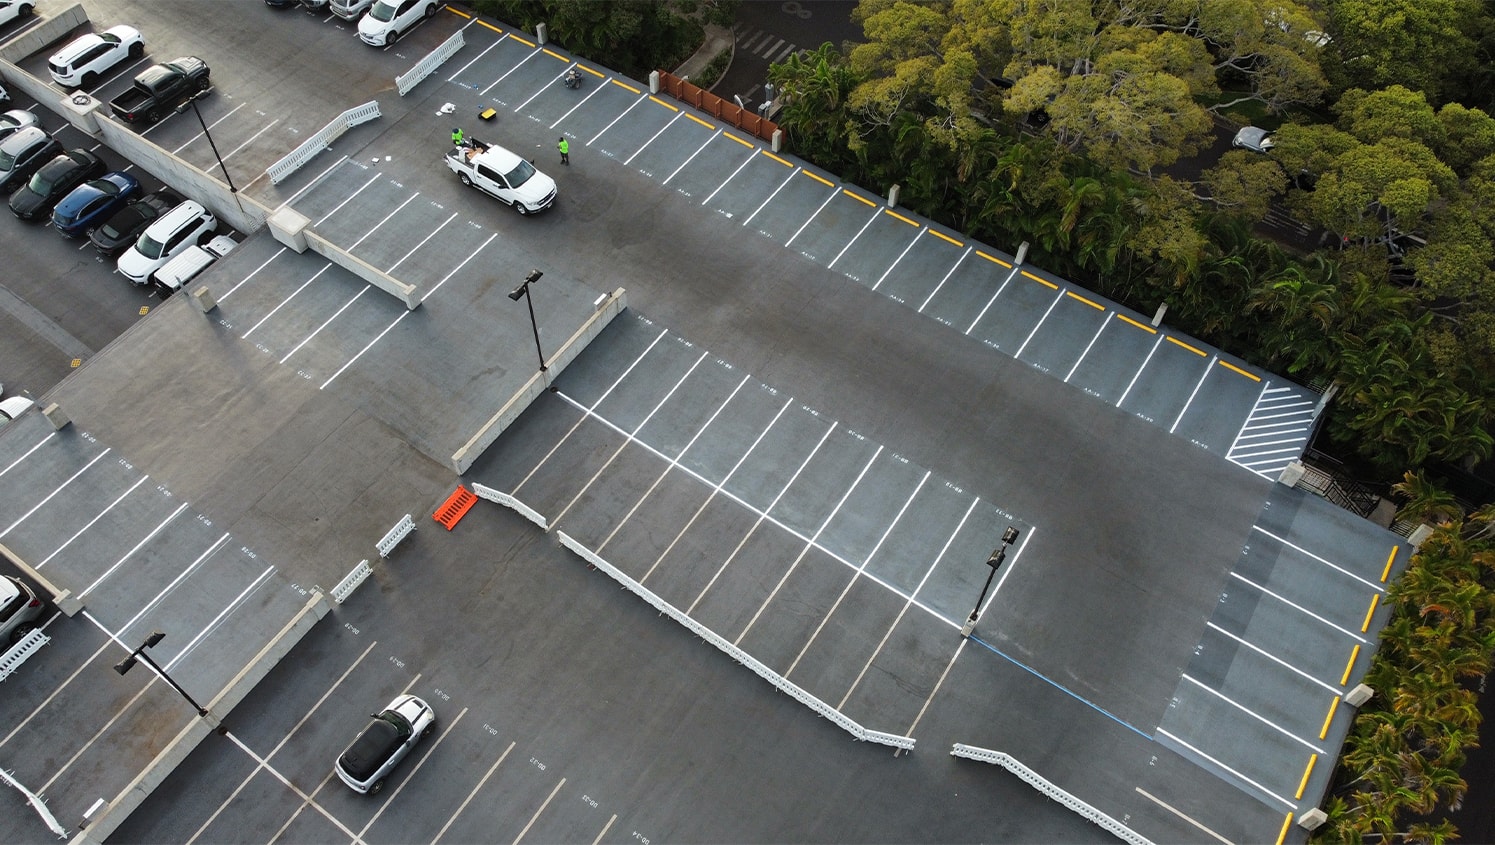 aerial view of whole parking lot with freshly painted line markings